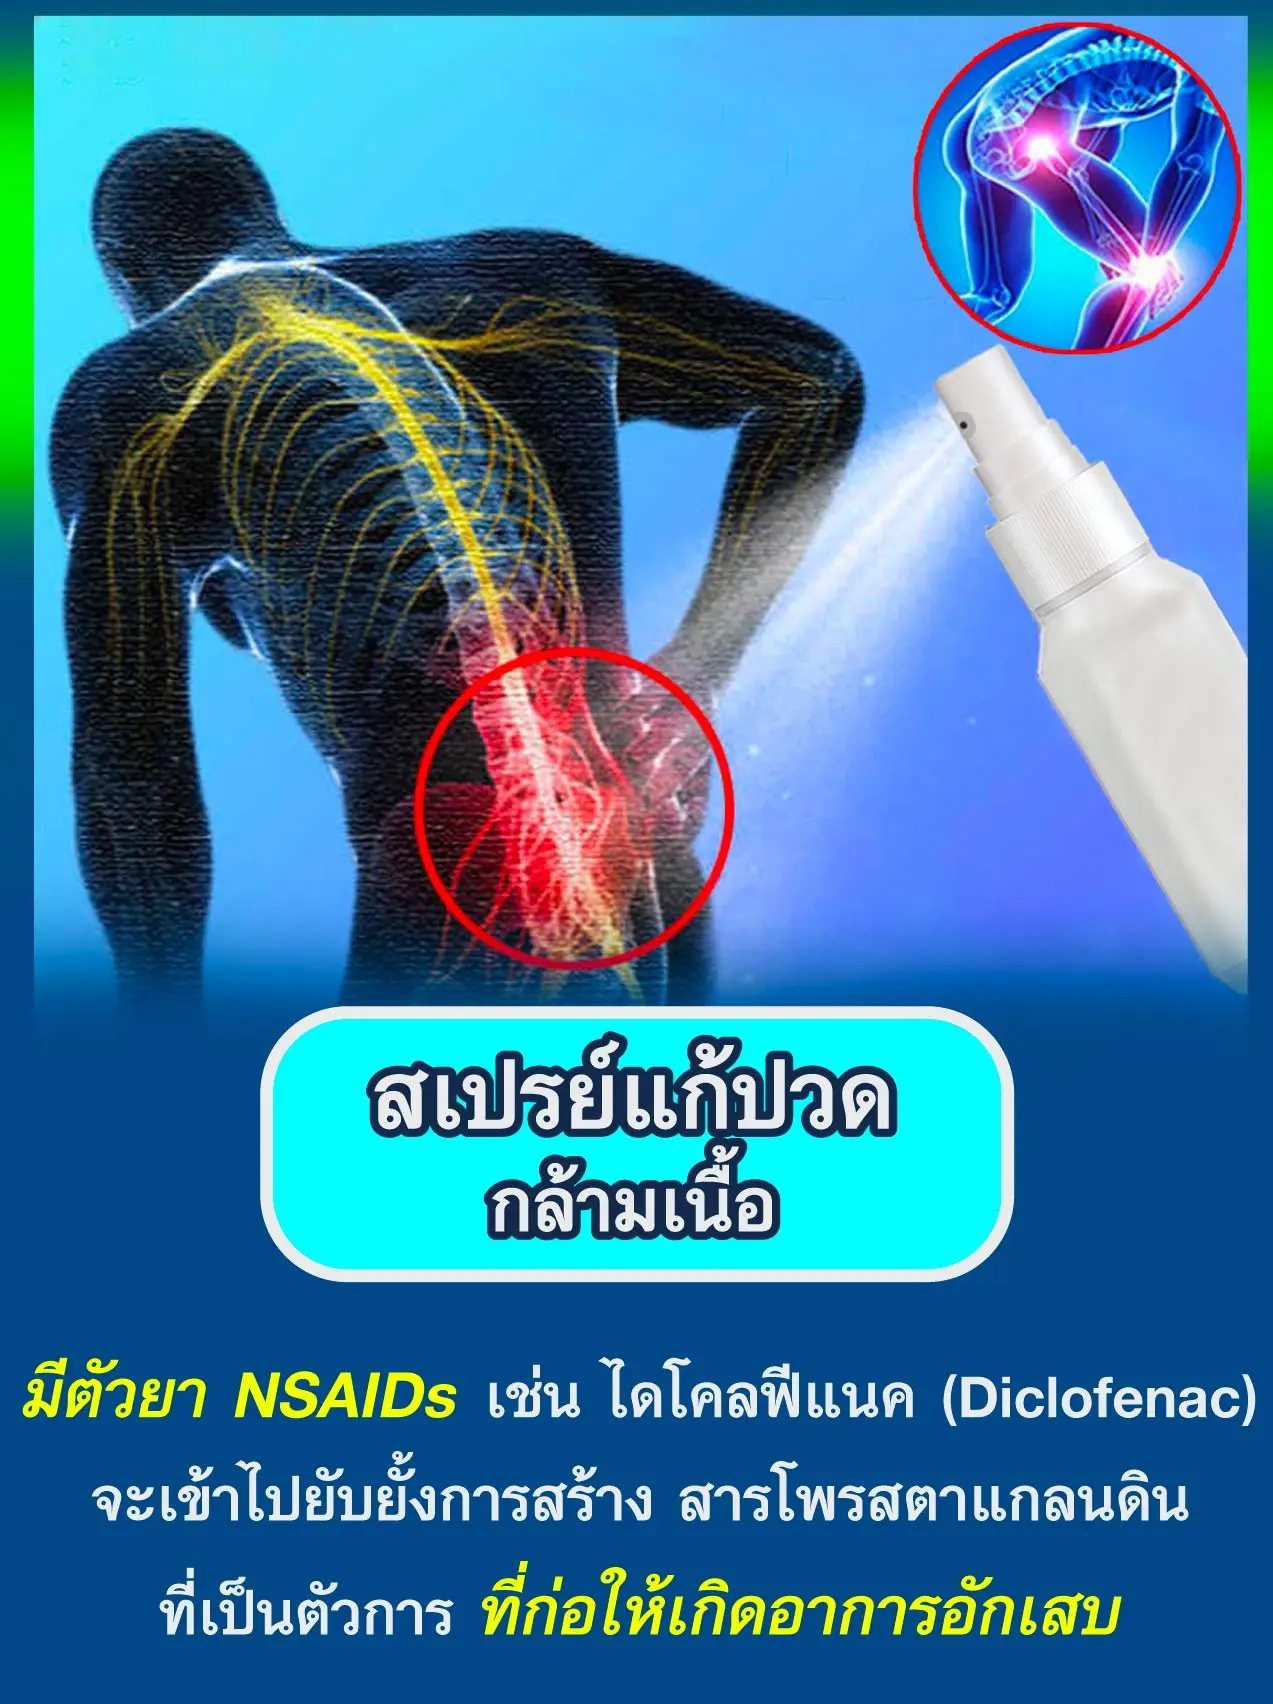 1-Knee-joint-spray-Medicine-for-knee-pain-relief